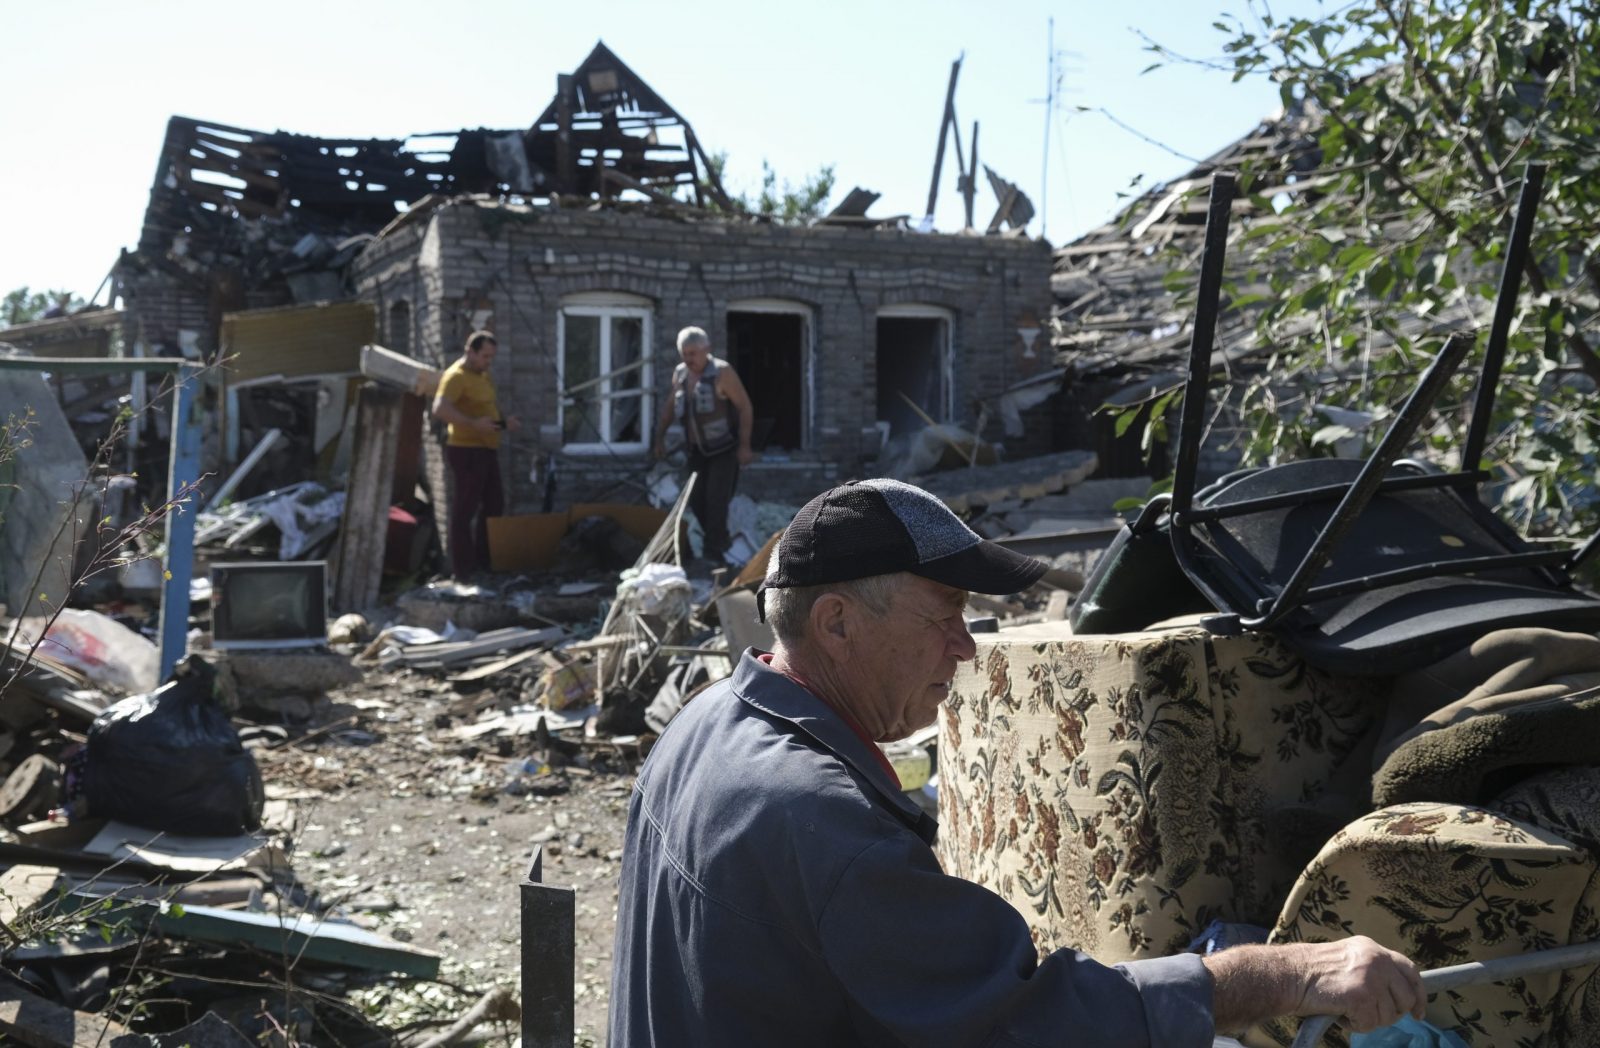 epa10189911 Locals inspect damaged private buildings after shelling in the eastern Ukrainian city of Kramatorsk, Ukraine, 17 September 2022 amid the Russian invasion. At least three persons were injured during that shelling, according to the head of the Kramatorsk City Council Oleksandr Goncharenkod. The Ukrainian army pushed Russian troops from occupied territory in the northeast of the country in a counterattack. Kharkiv and surrounding areas have been the target of heavy shelling since February 2022, when Russian troops entered Ukraine starting a conflict that has provoked destruction and a humanitarian crisis.  EPA/SERGEY SHESTAK